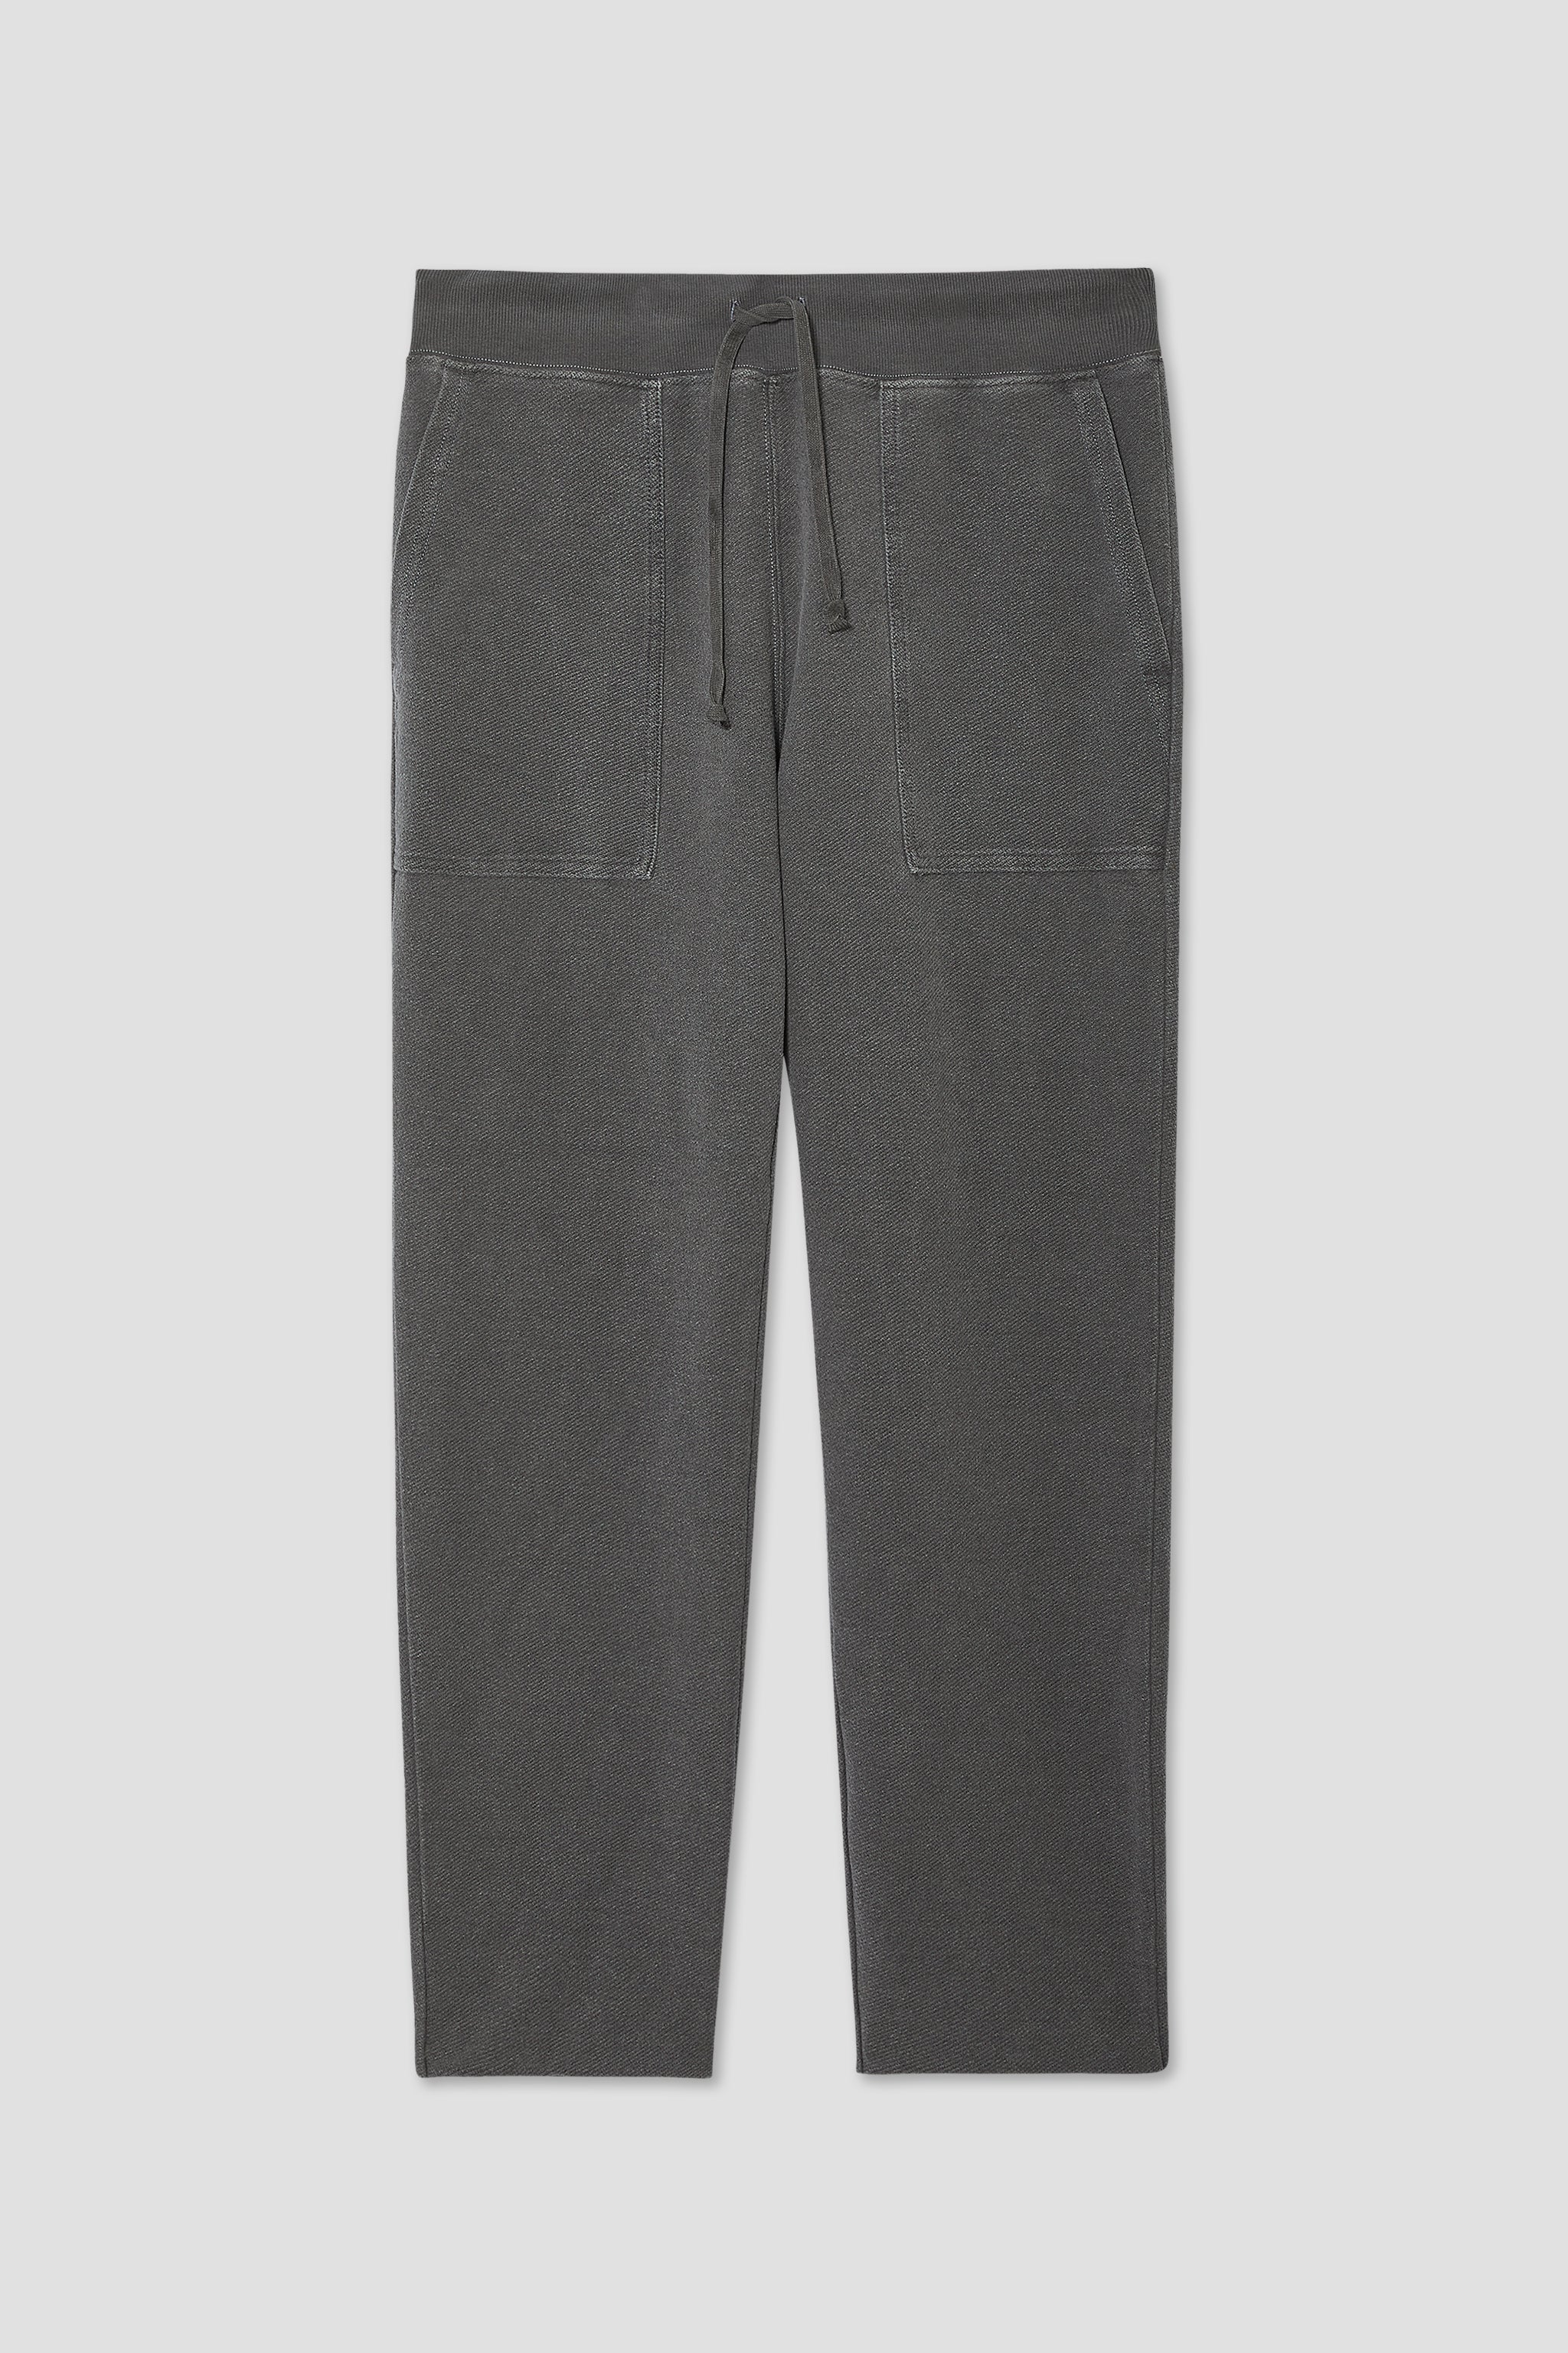 Gray Everyday Terry Sweatpants - All American Roughneck